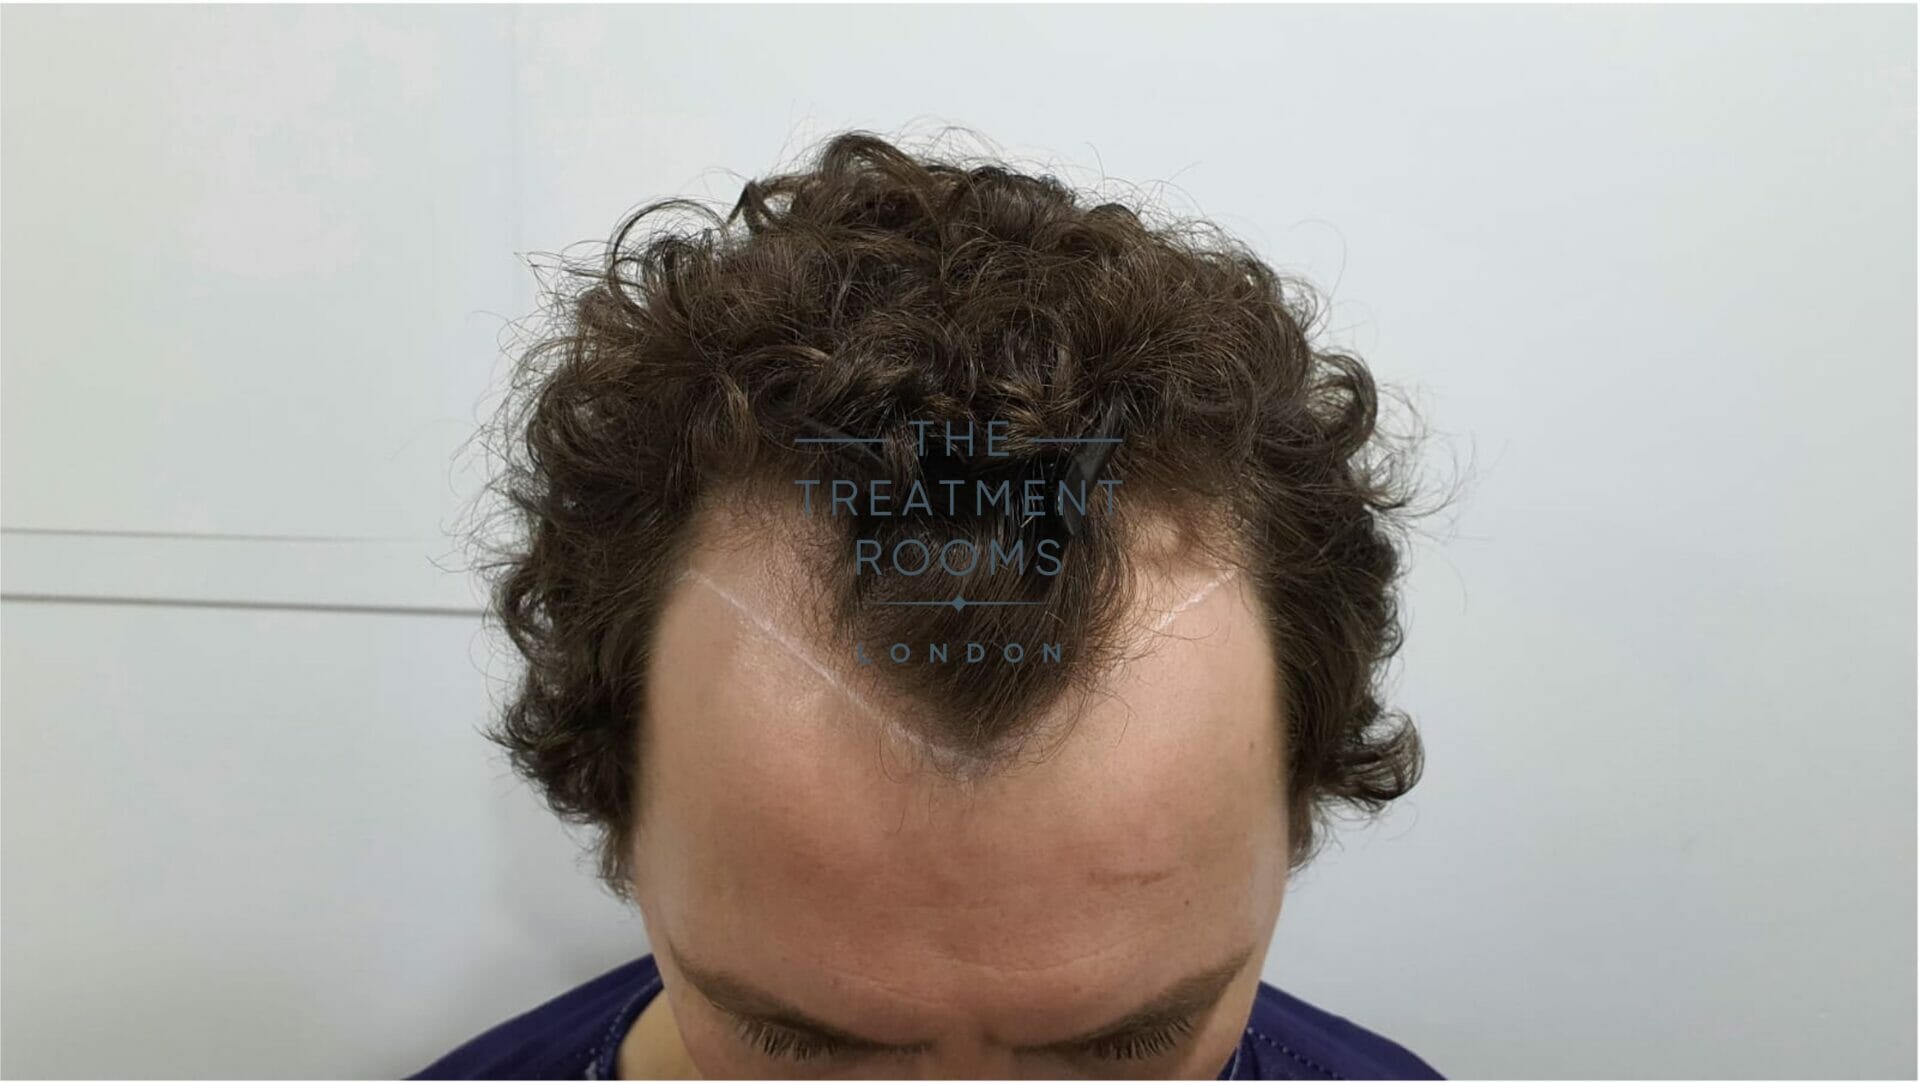 How Much a FUE Hair Transplant Costs in the UK | Treatment Rooms London